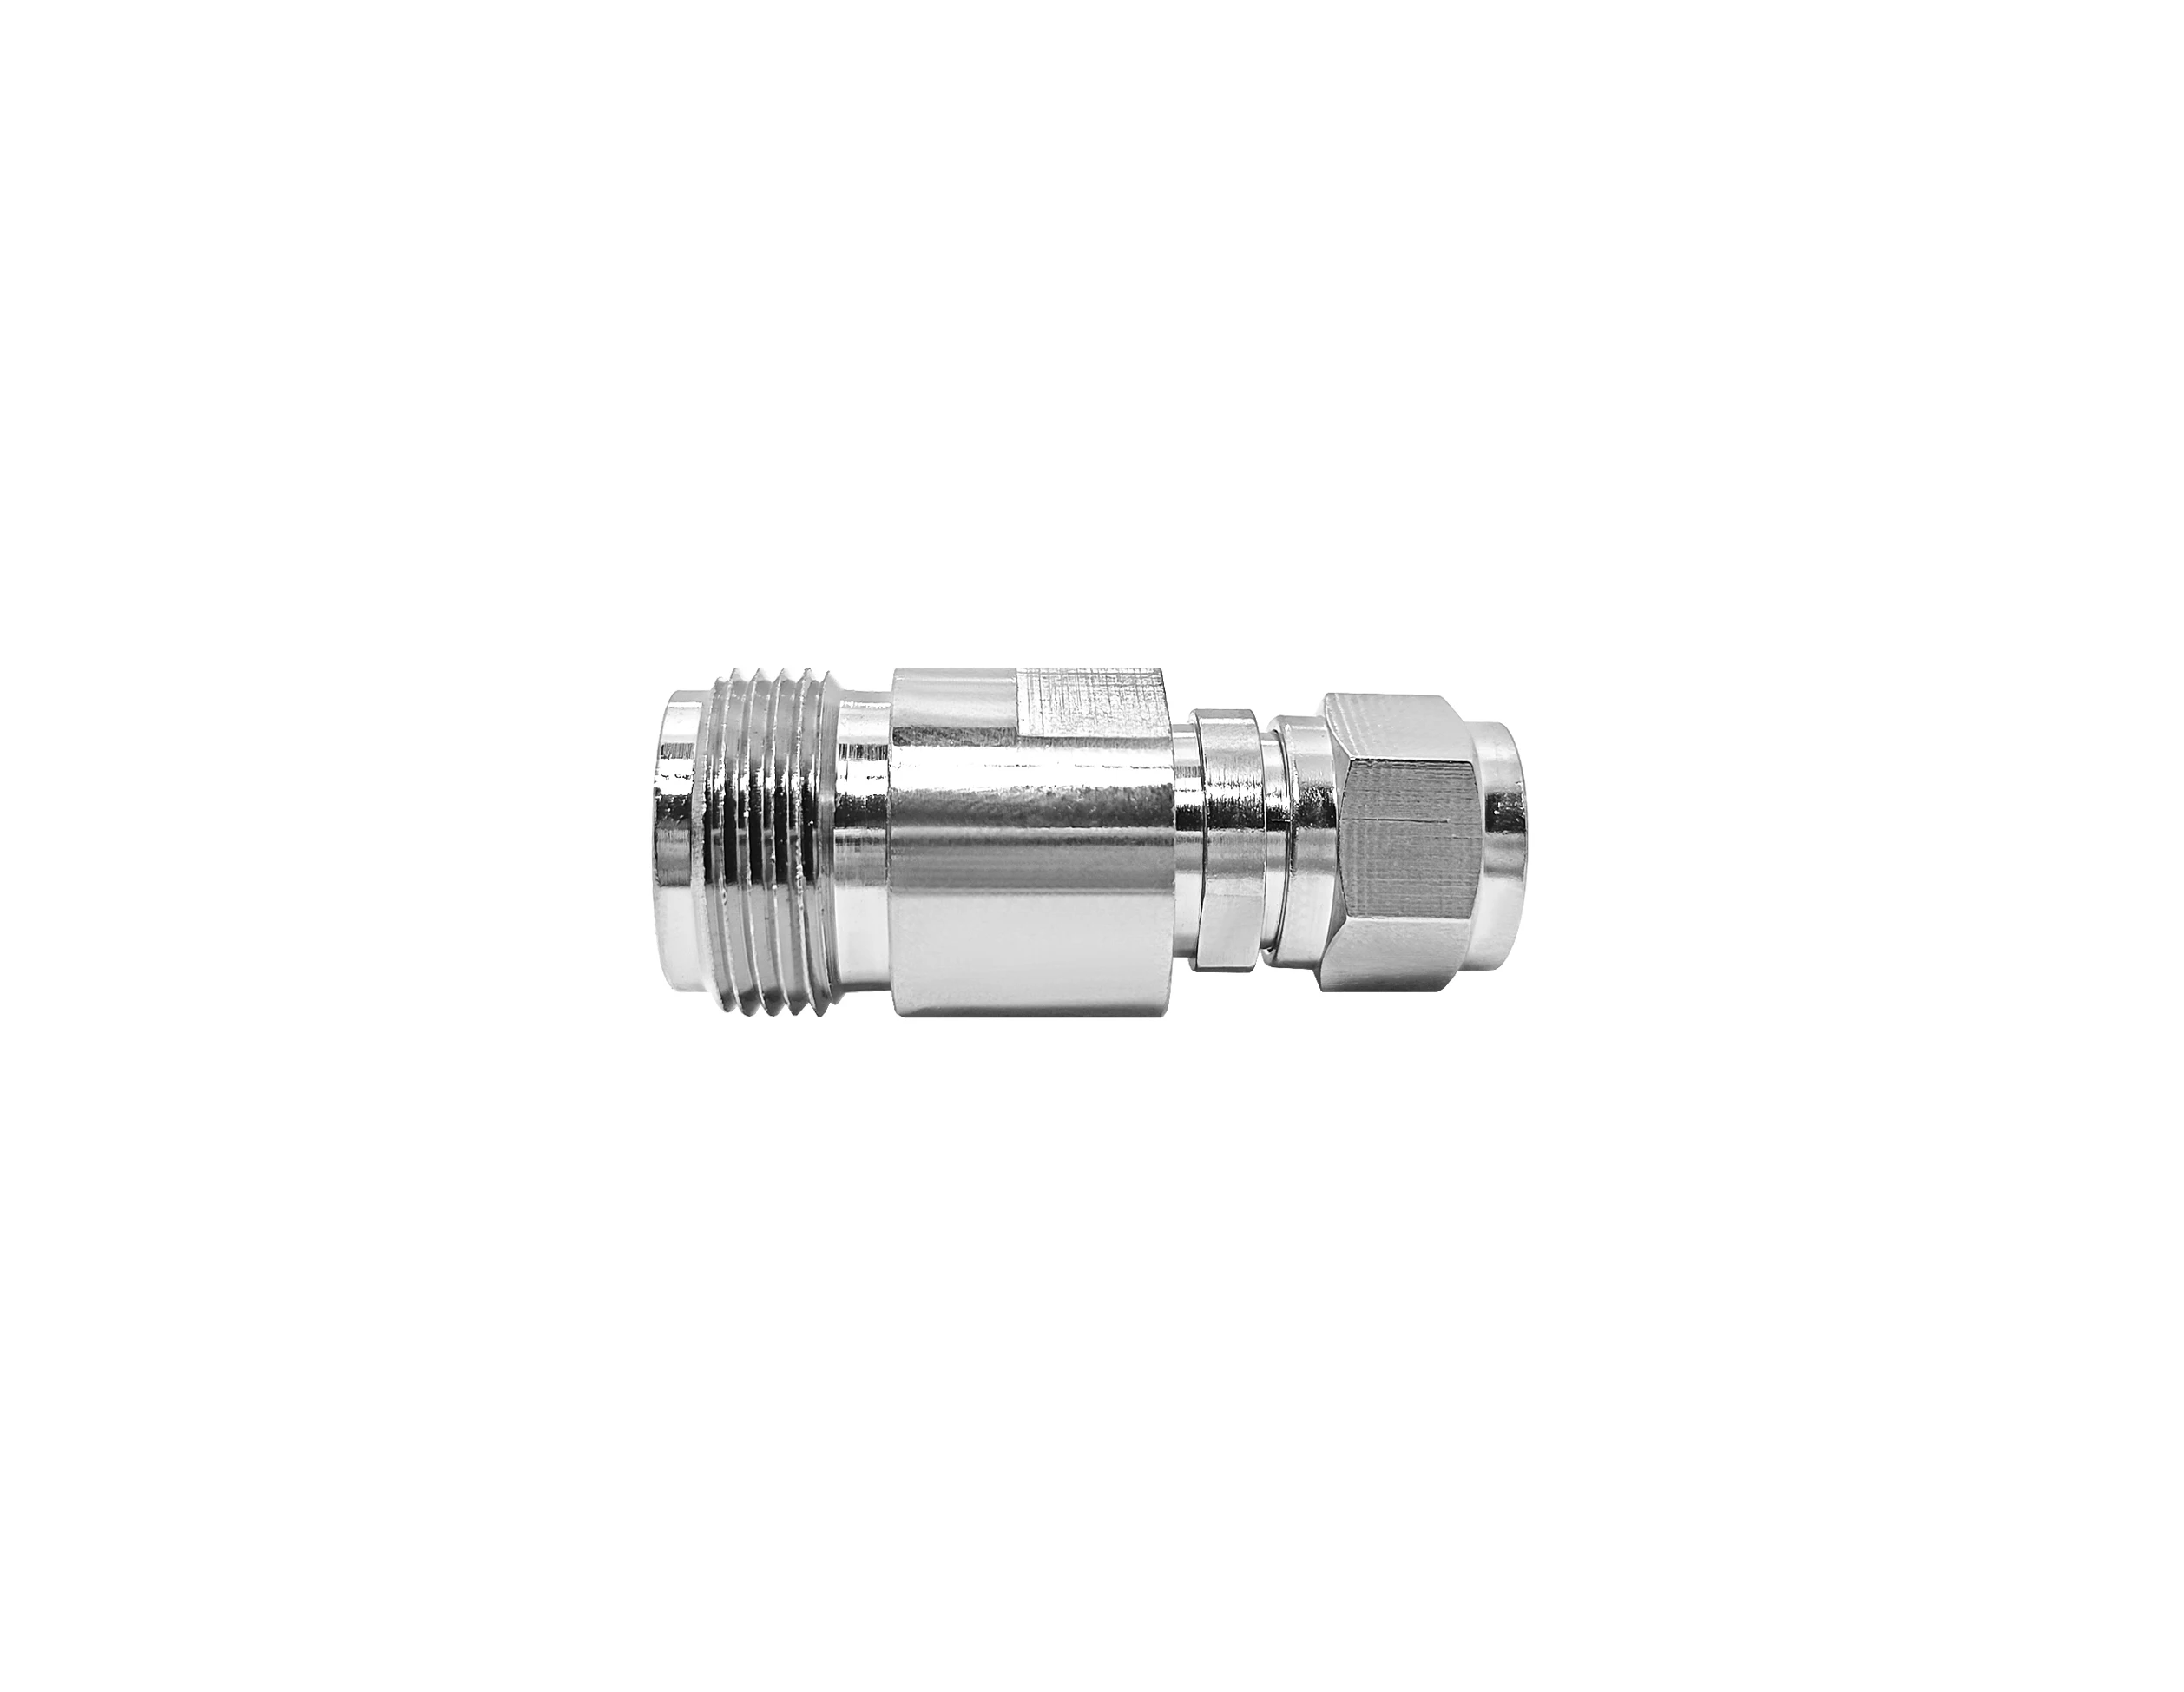 RF Coaxial Adapter N Female Jack to F Male Plug Adapter Connector supplier